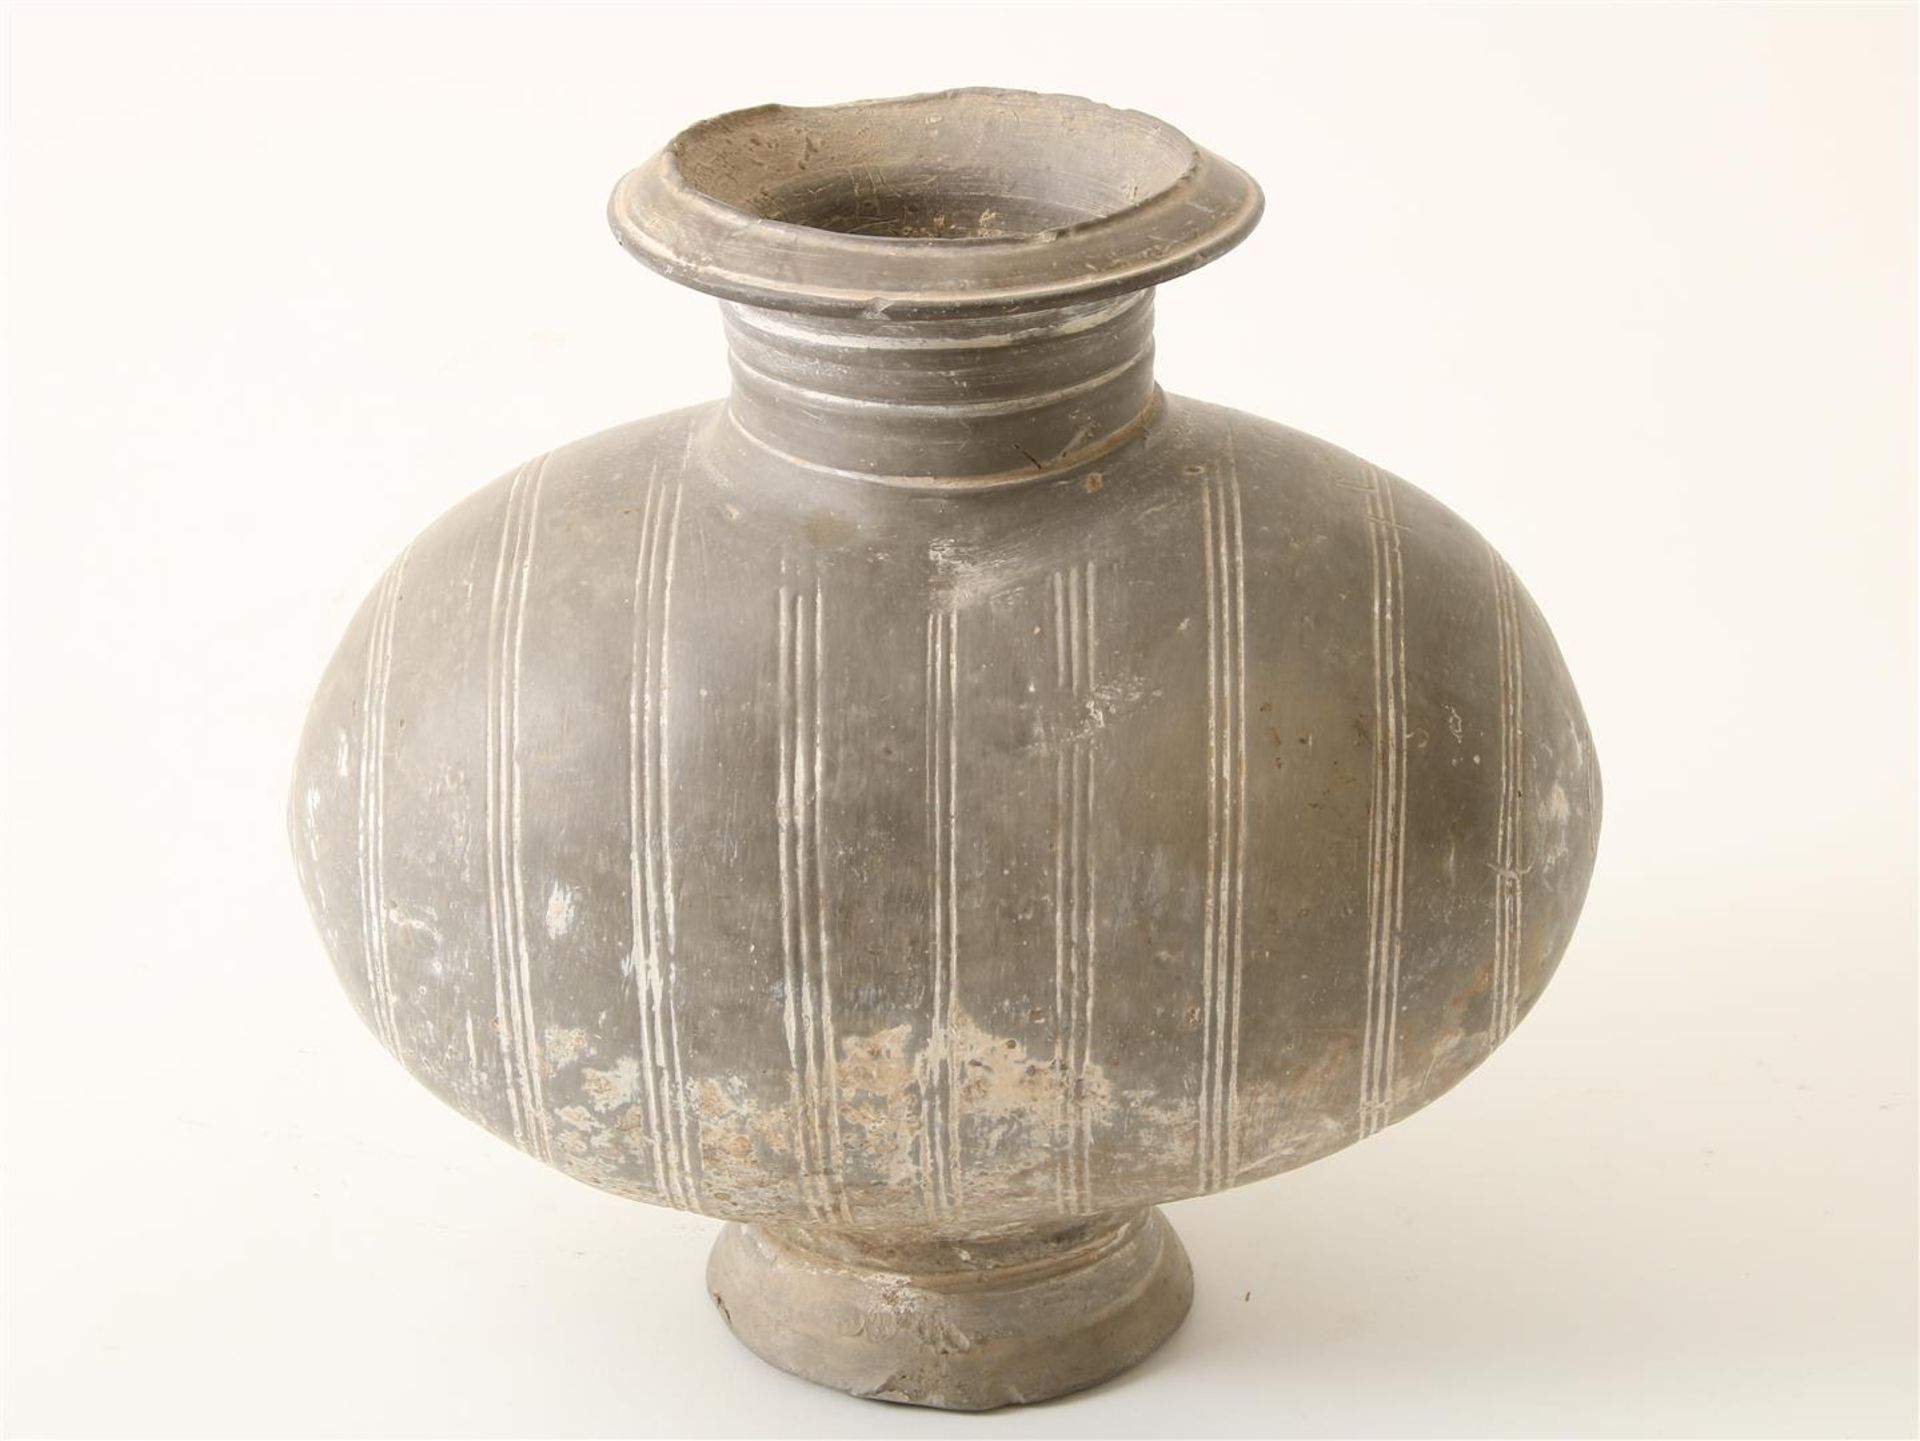 China, earthenware cocoon jar, Han dynasty ( 206 BC - 220 AD) The gray vessel moulded with - Image 3 of 4